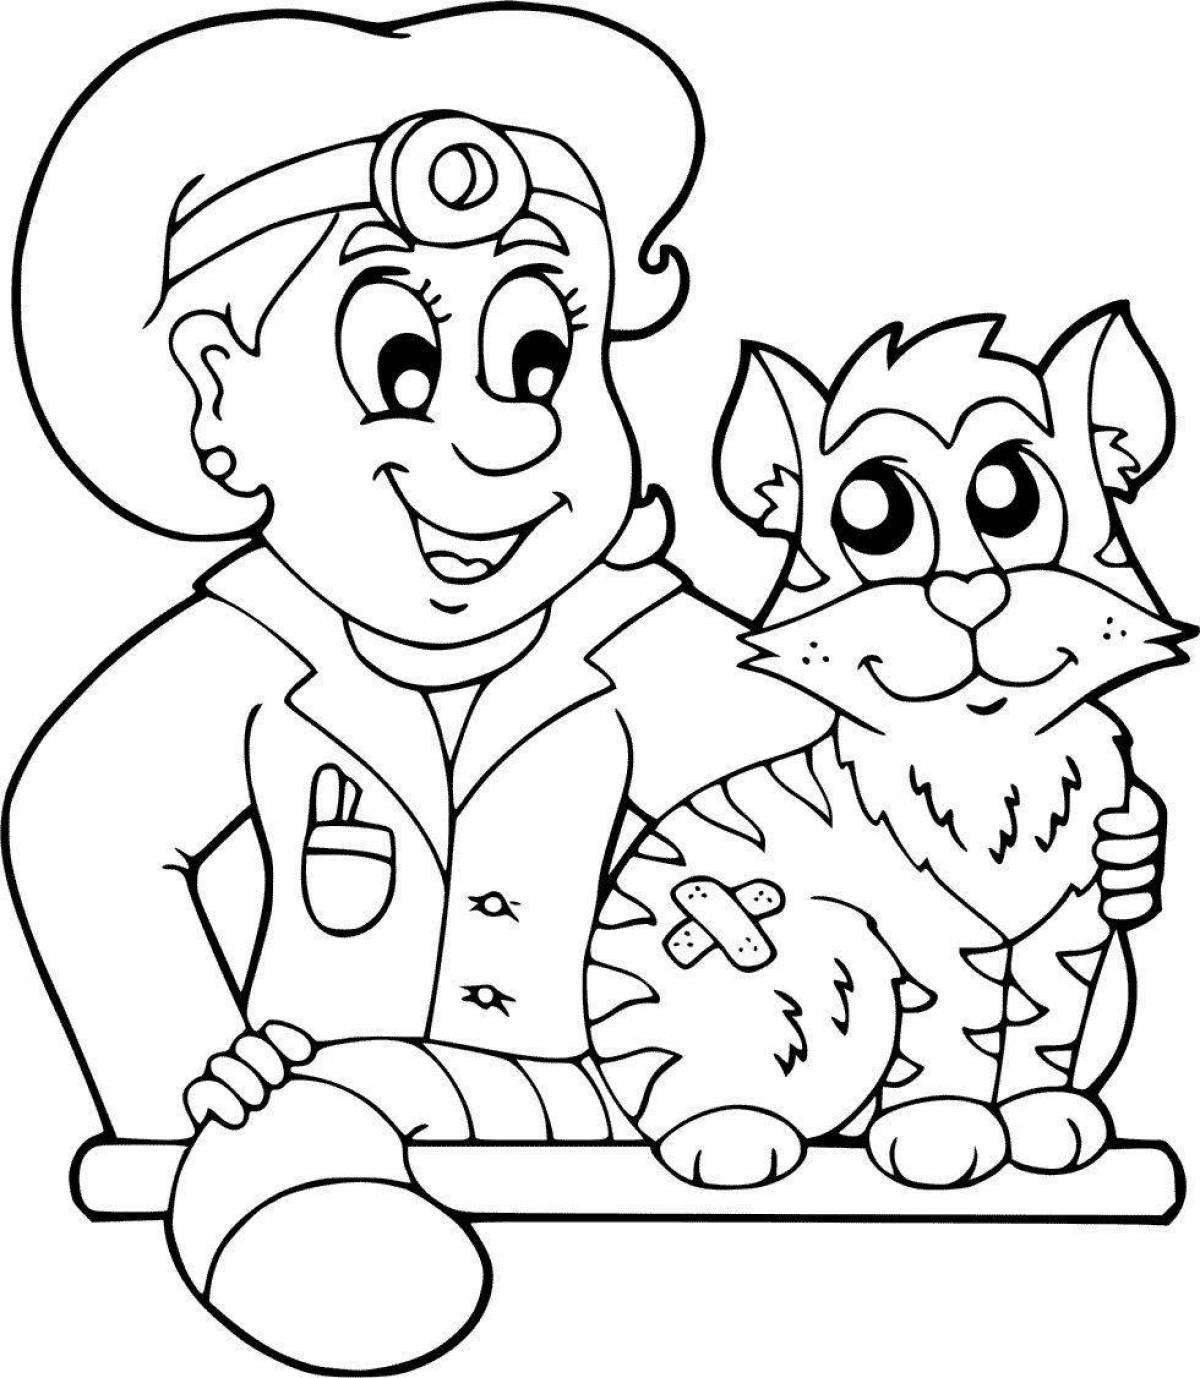 Coloring page funny veterinarian